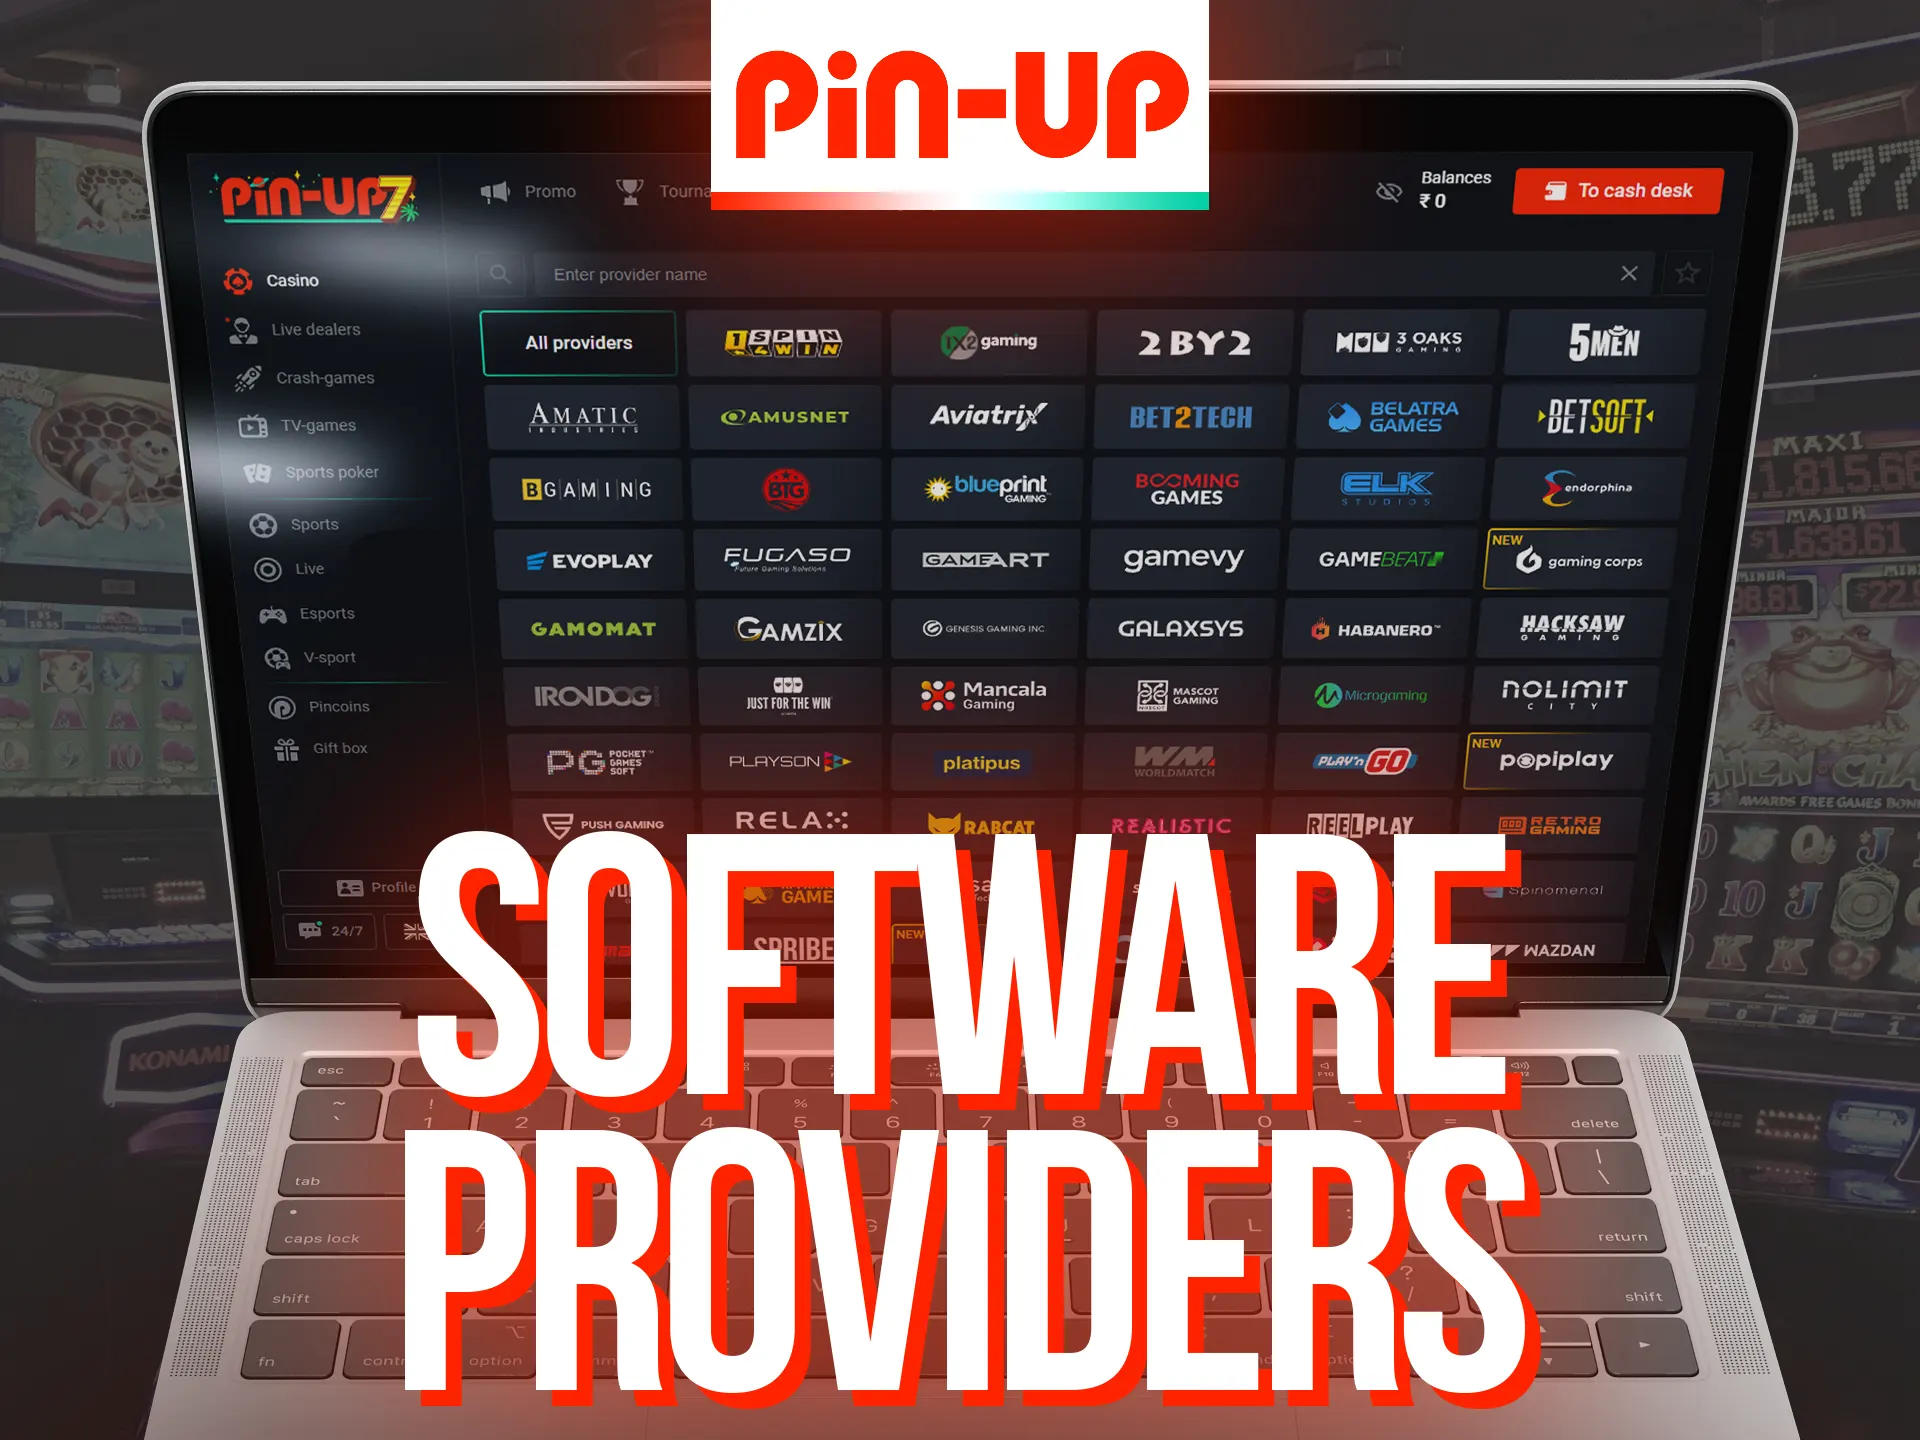 At Pin-Up casino you can play games from trusted gambling providers.